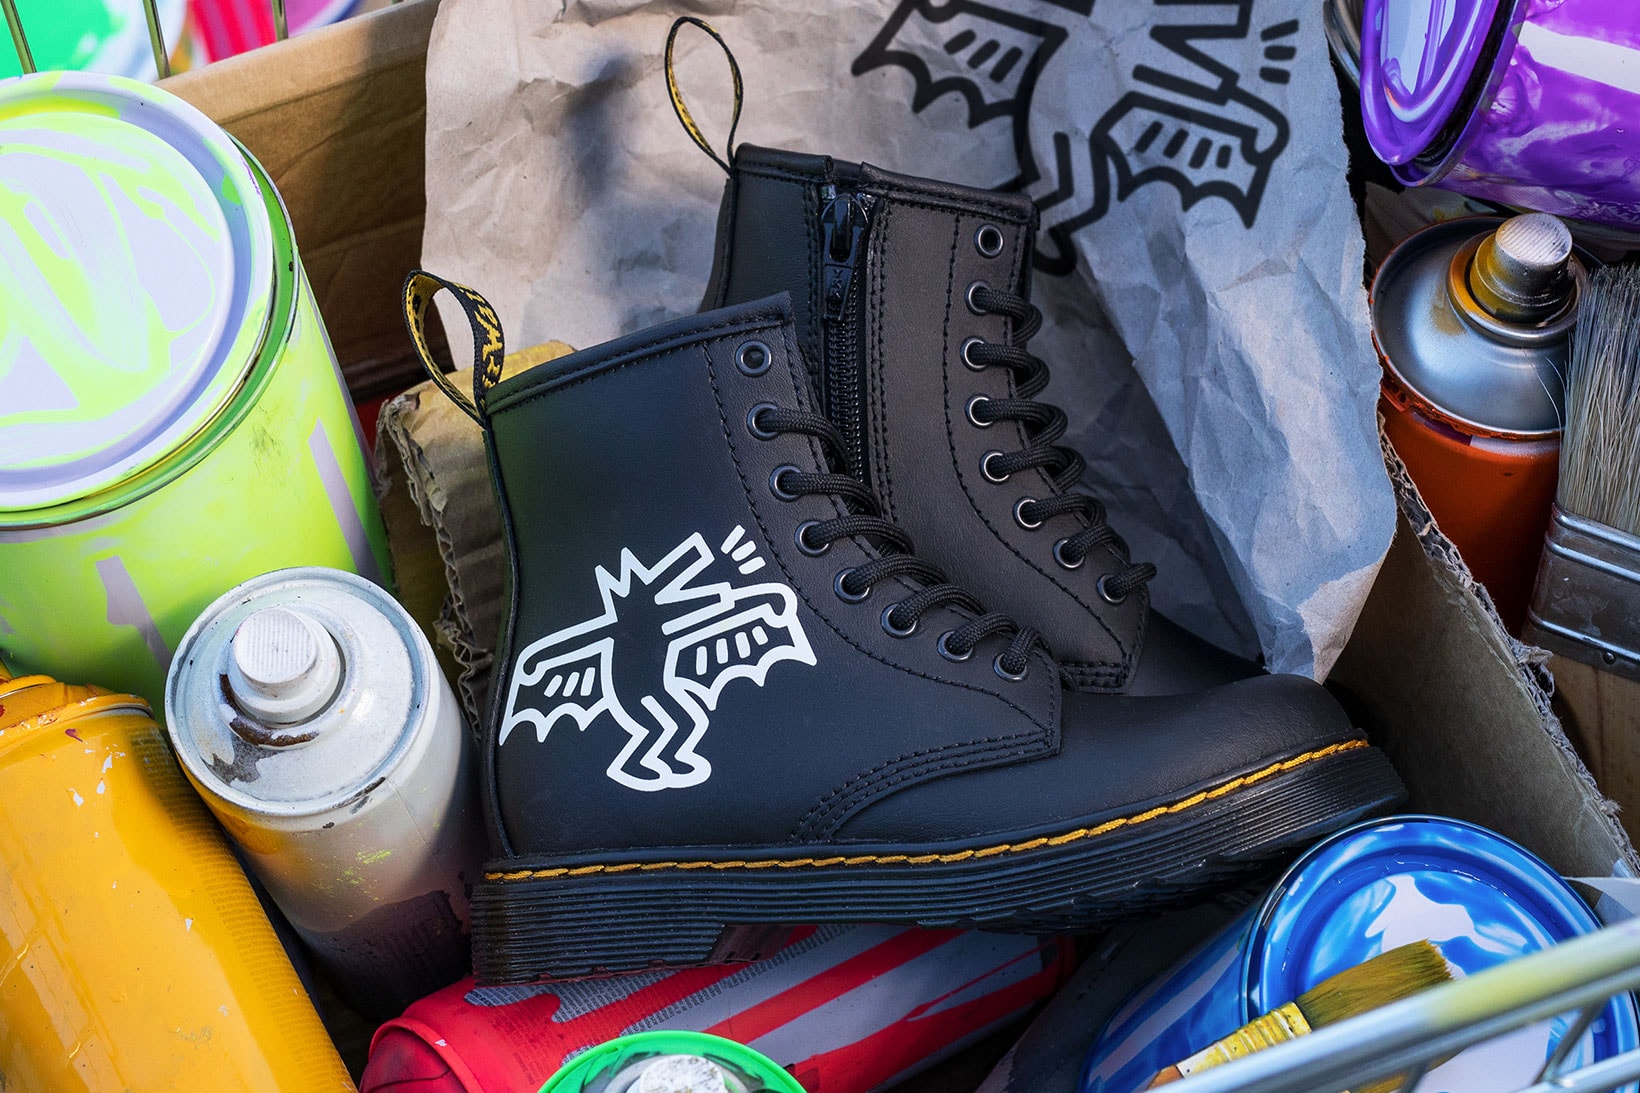 Dr. Martens Keith Haring Collaboration Boots Shoes 1460 Black Patterns Illustrations Art Yellow Stitching